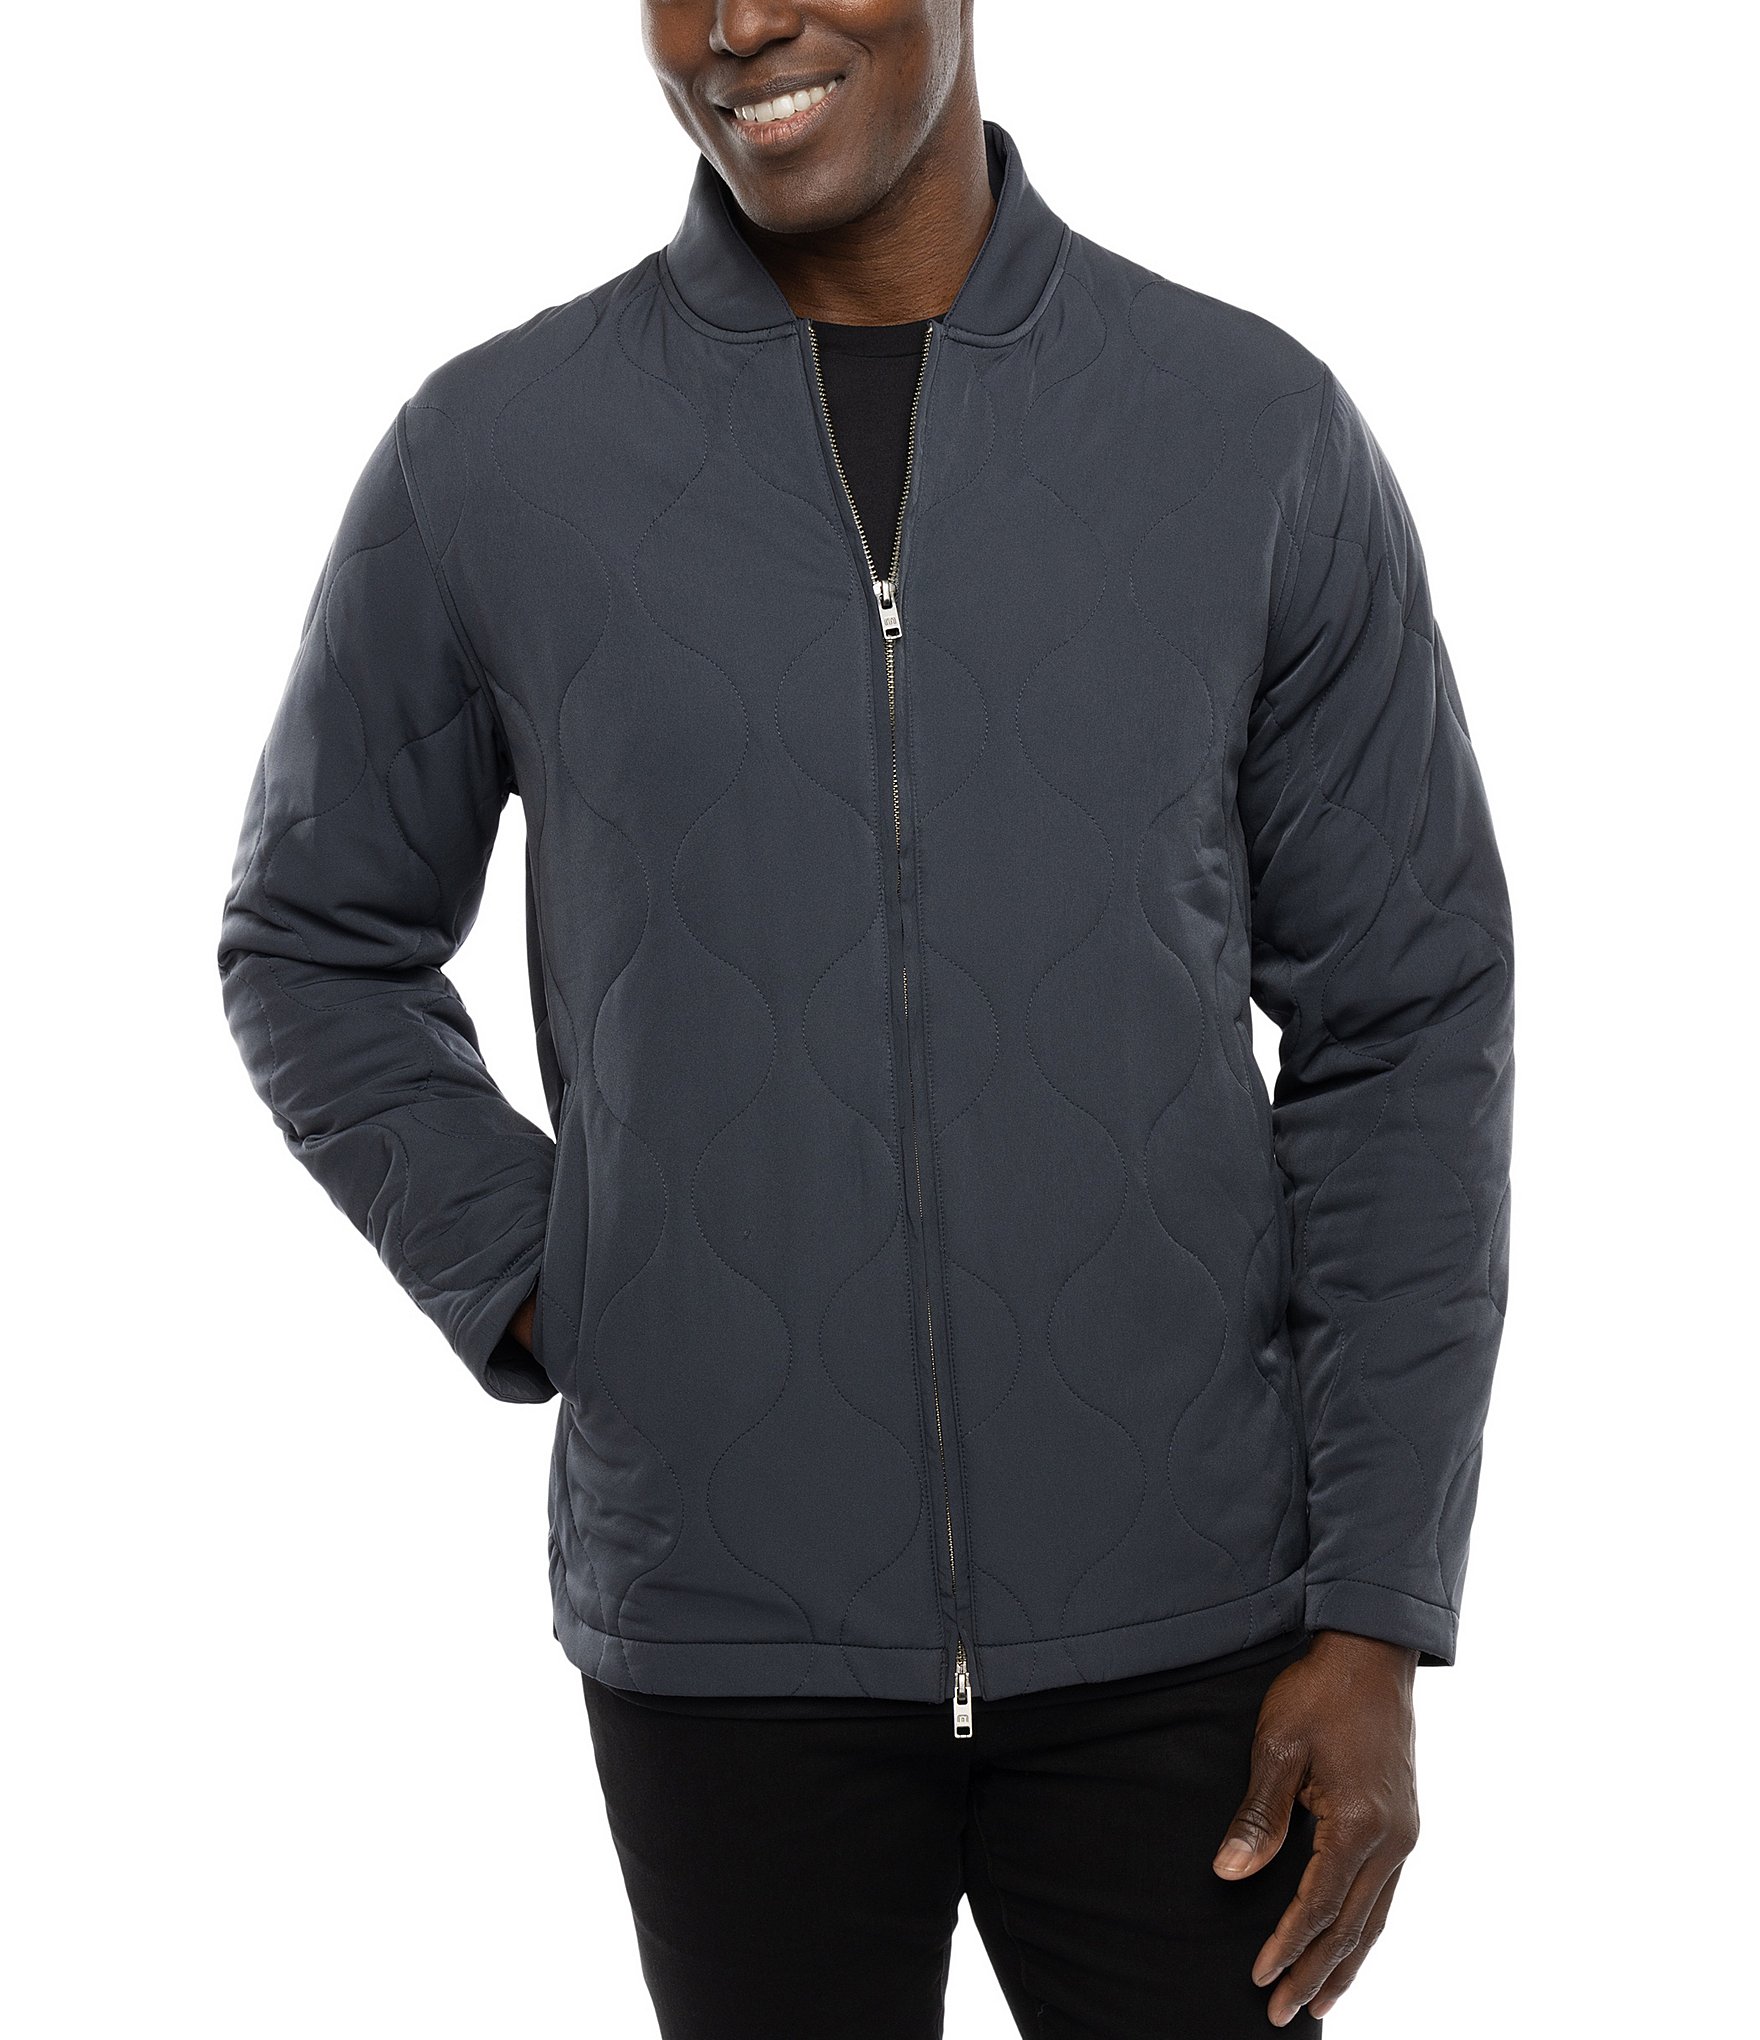 Roundtree & Yorke Matte Diamond Quilted Bomber Jacket